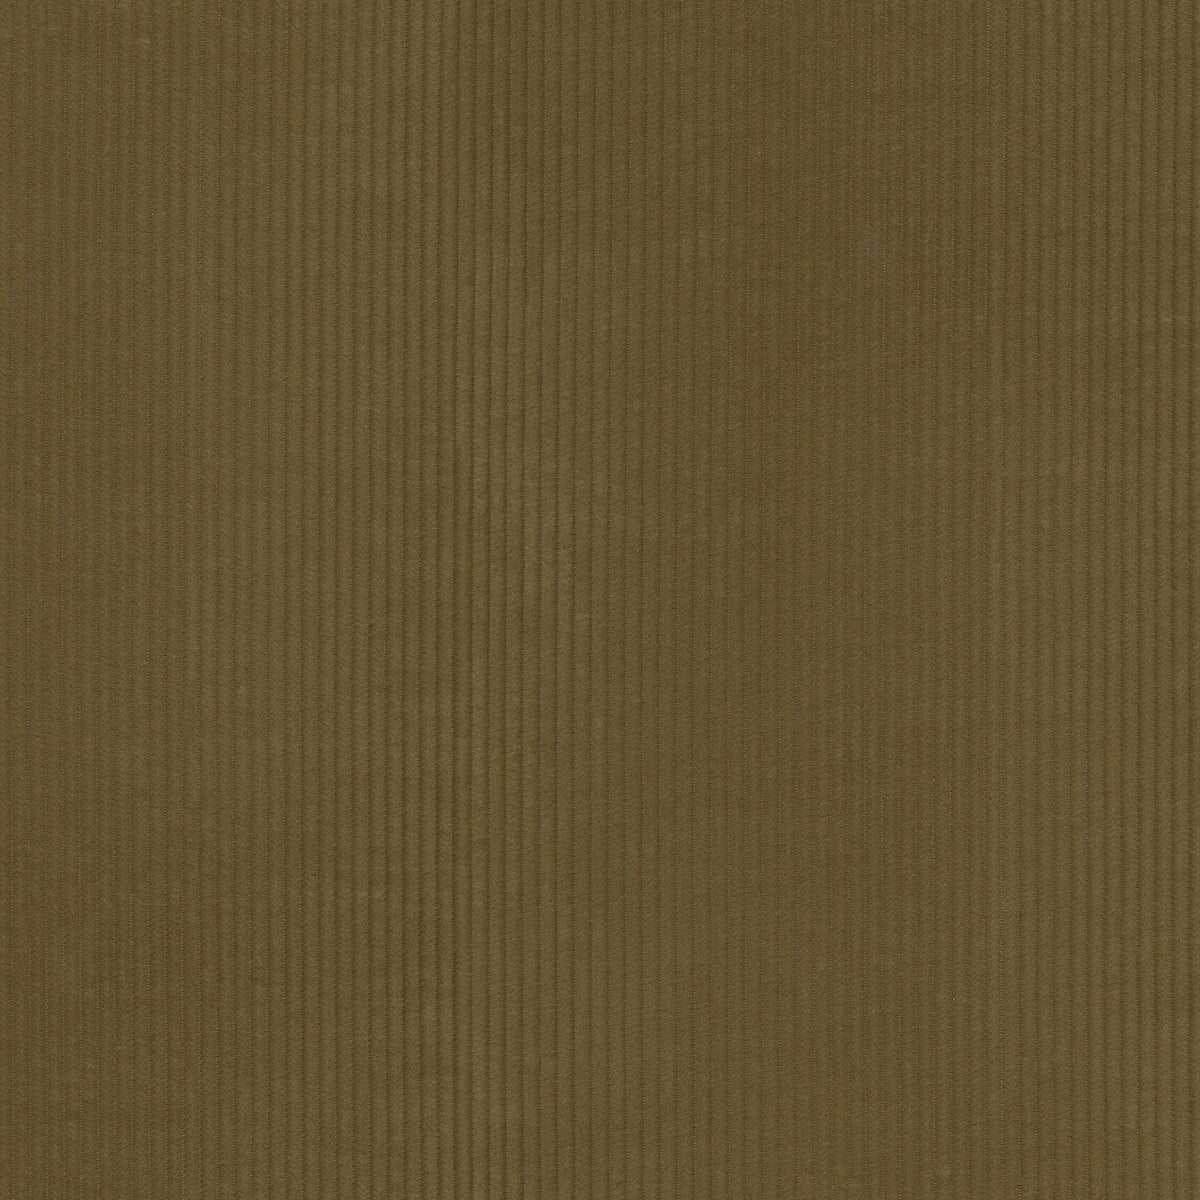 P/K Lifestyles Wales - Tobacco 412030 Upholstery Fabric